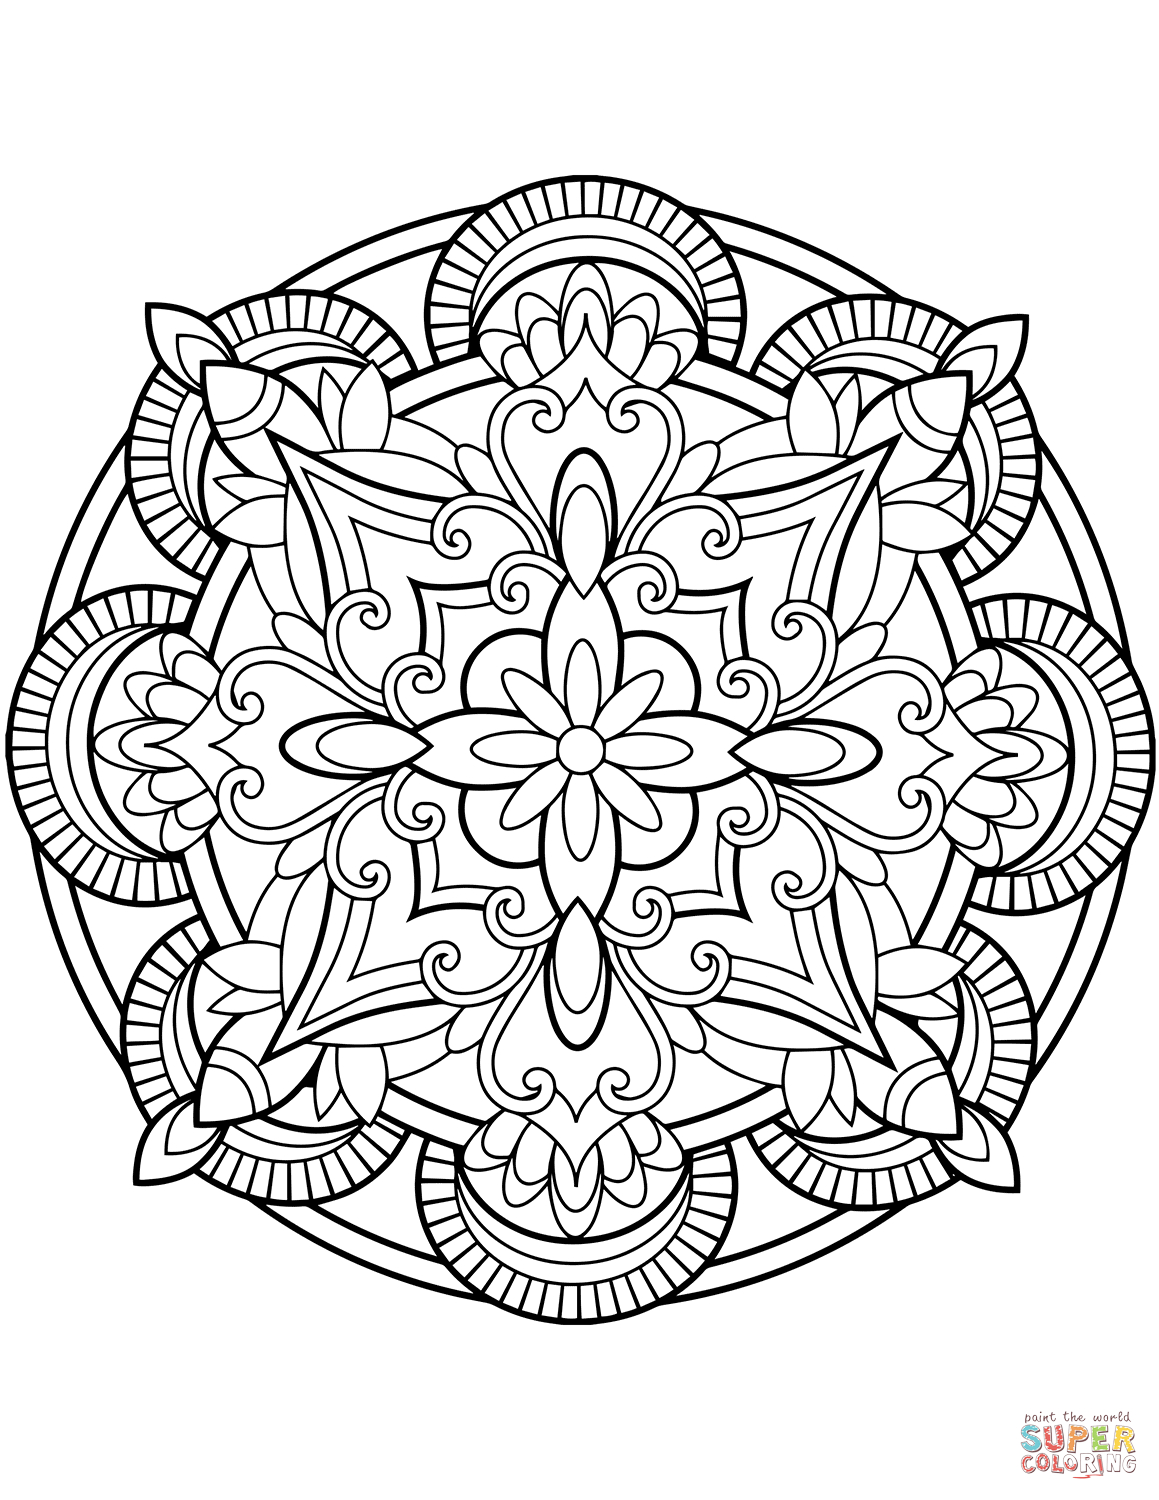 Mandala Color Pages Flower Mandala Coloring Page Free Printable Coloring Pages